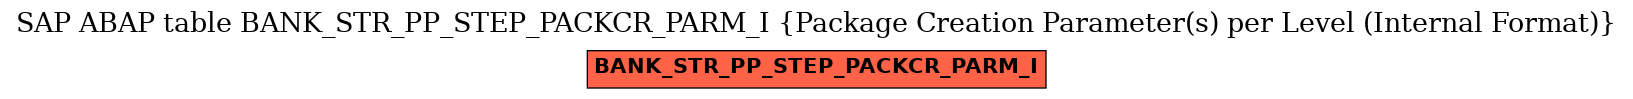 E-R Diagram for table BANK_STR_PP_STEP_PACKCR_PARM_I (Package Creation Parameter(s) per Level (Internal Format))